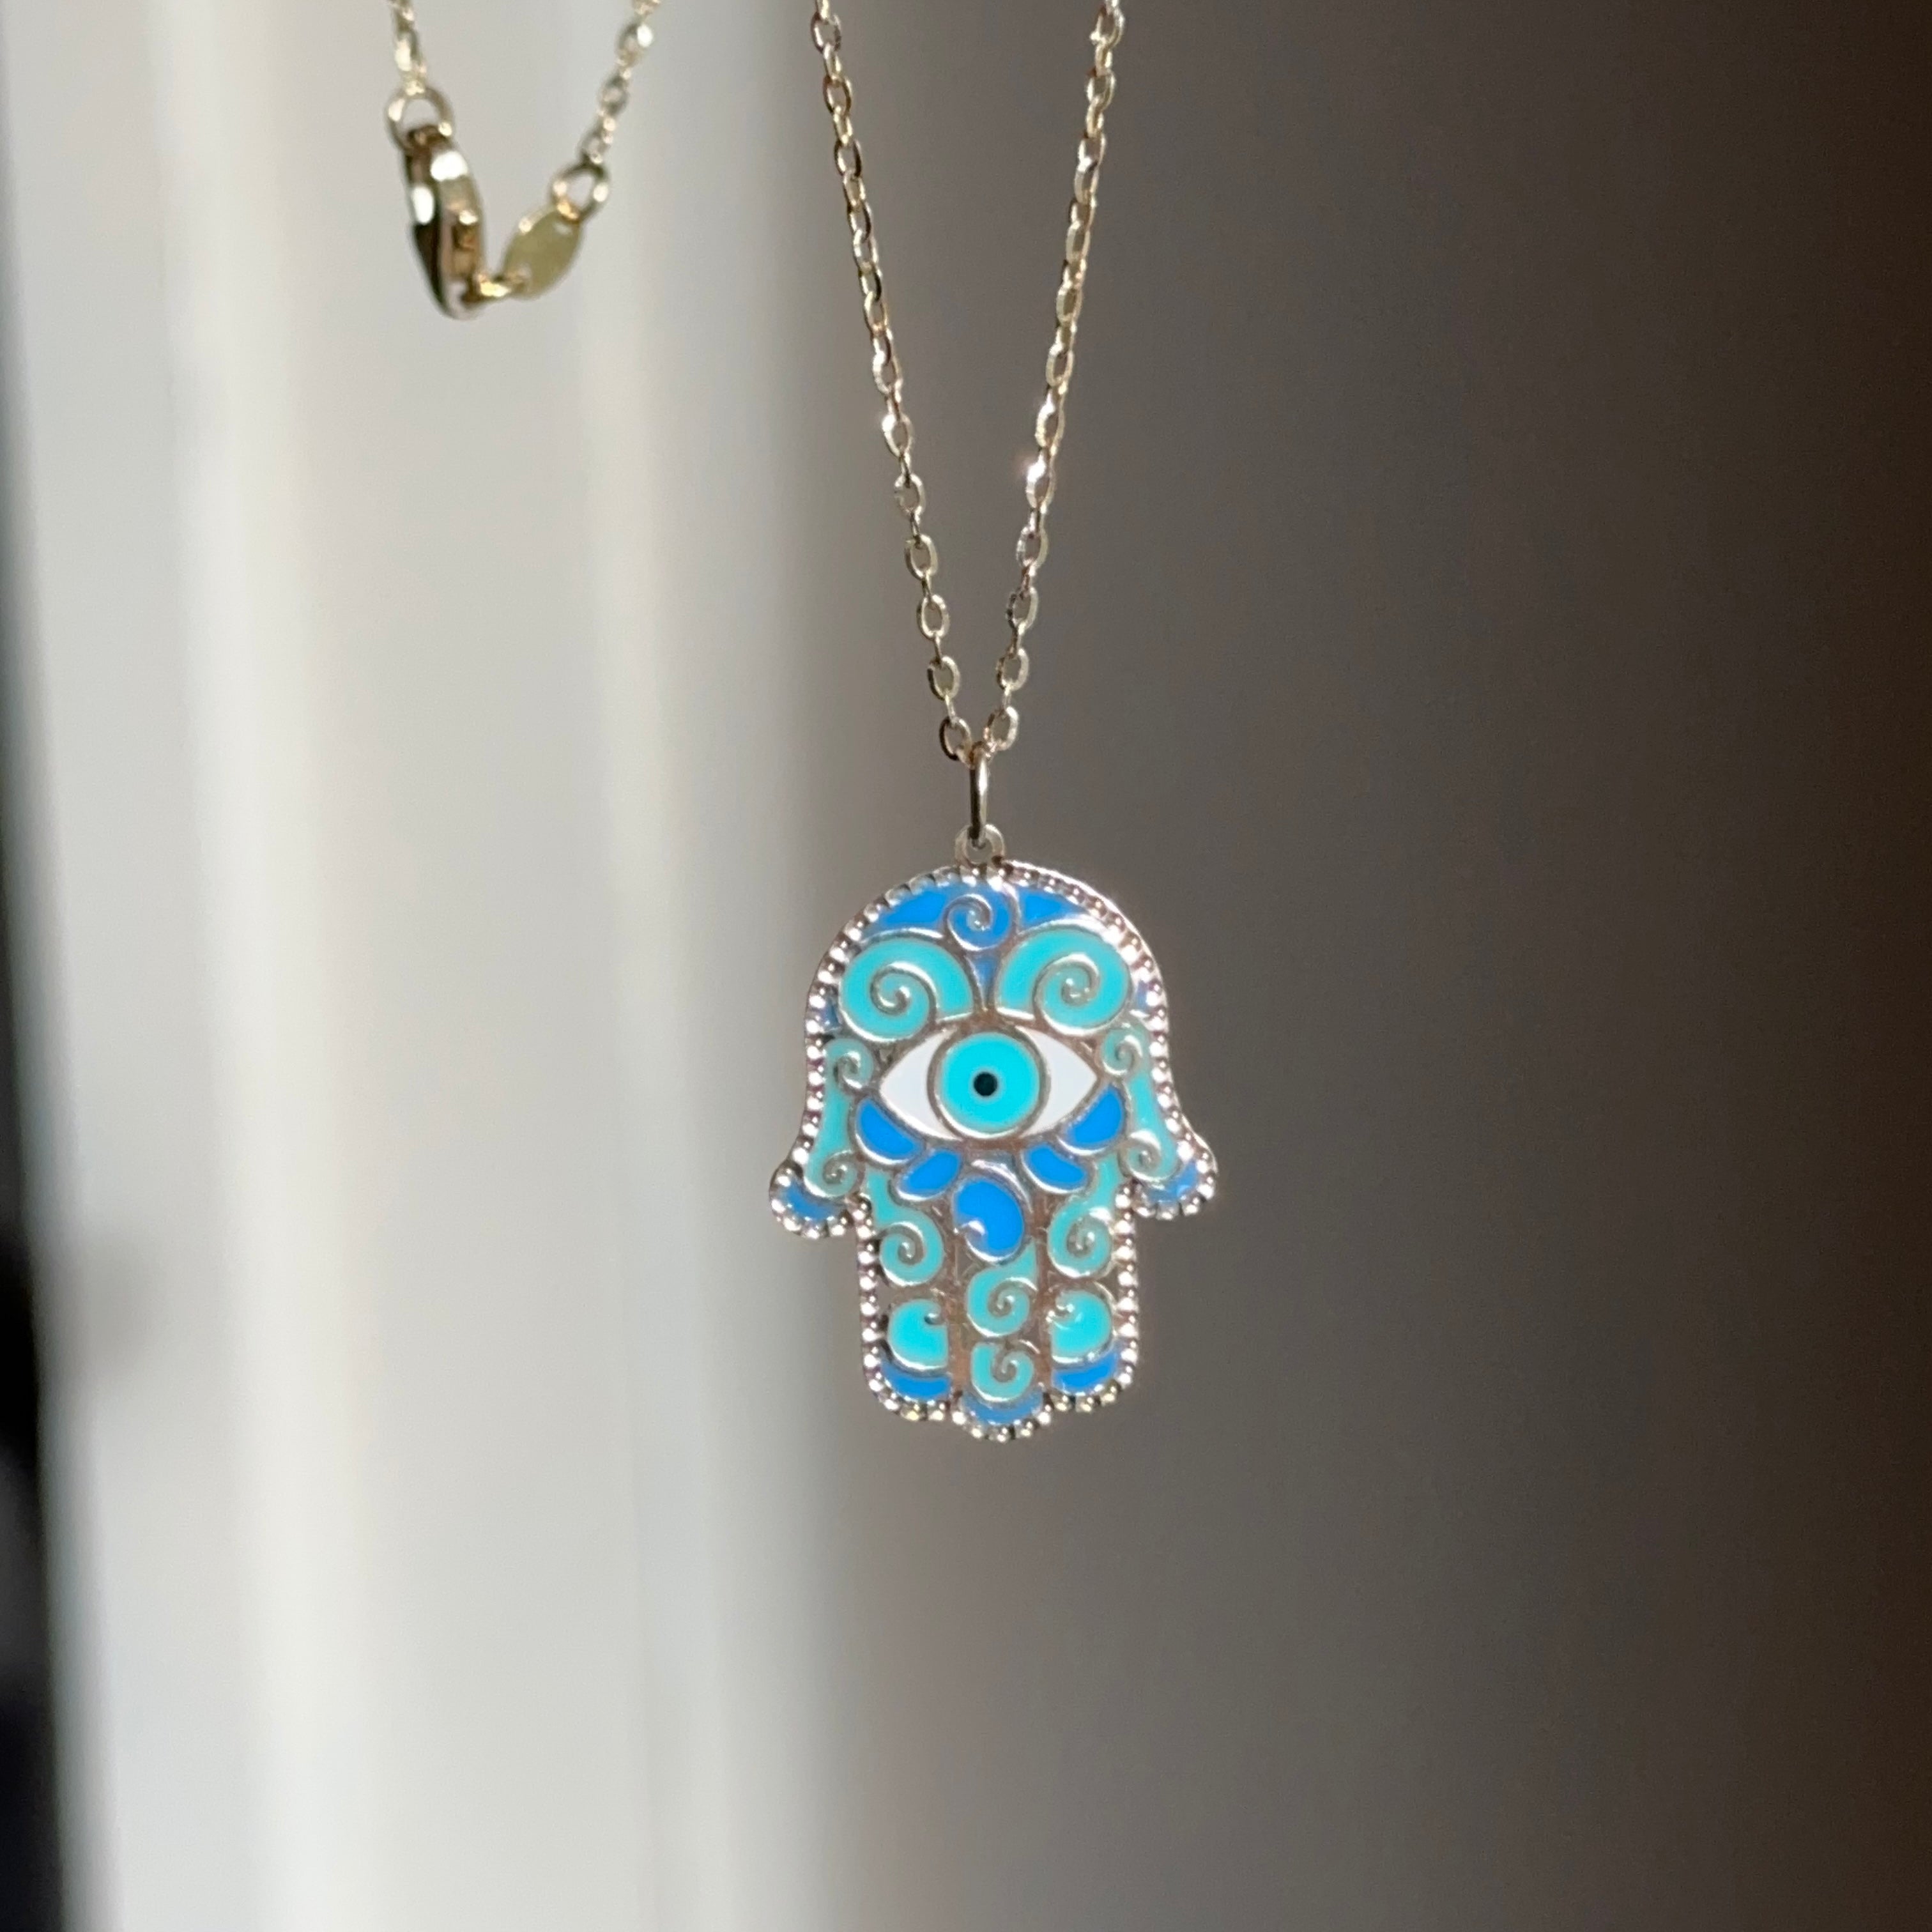 HAMSA HAND WITH TURQUOISE EVIL EYE PENDANT NECKLACE - Gold Purity